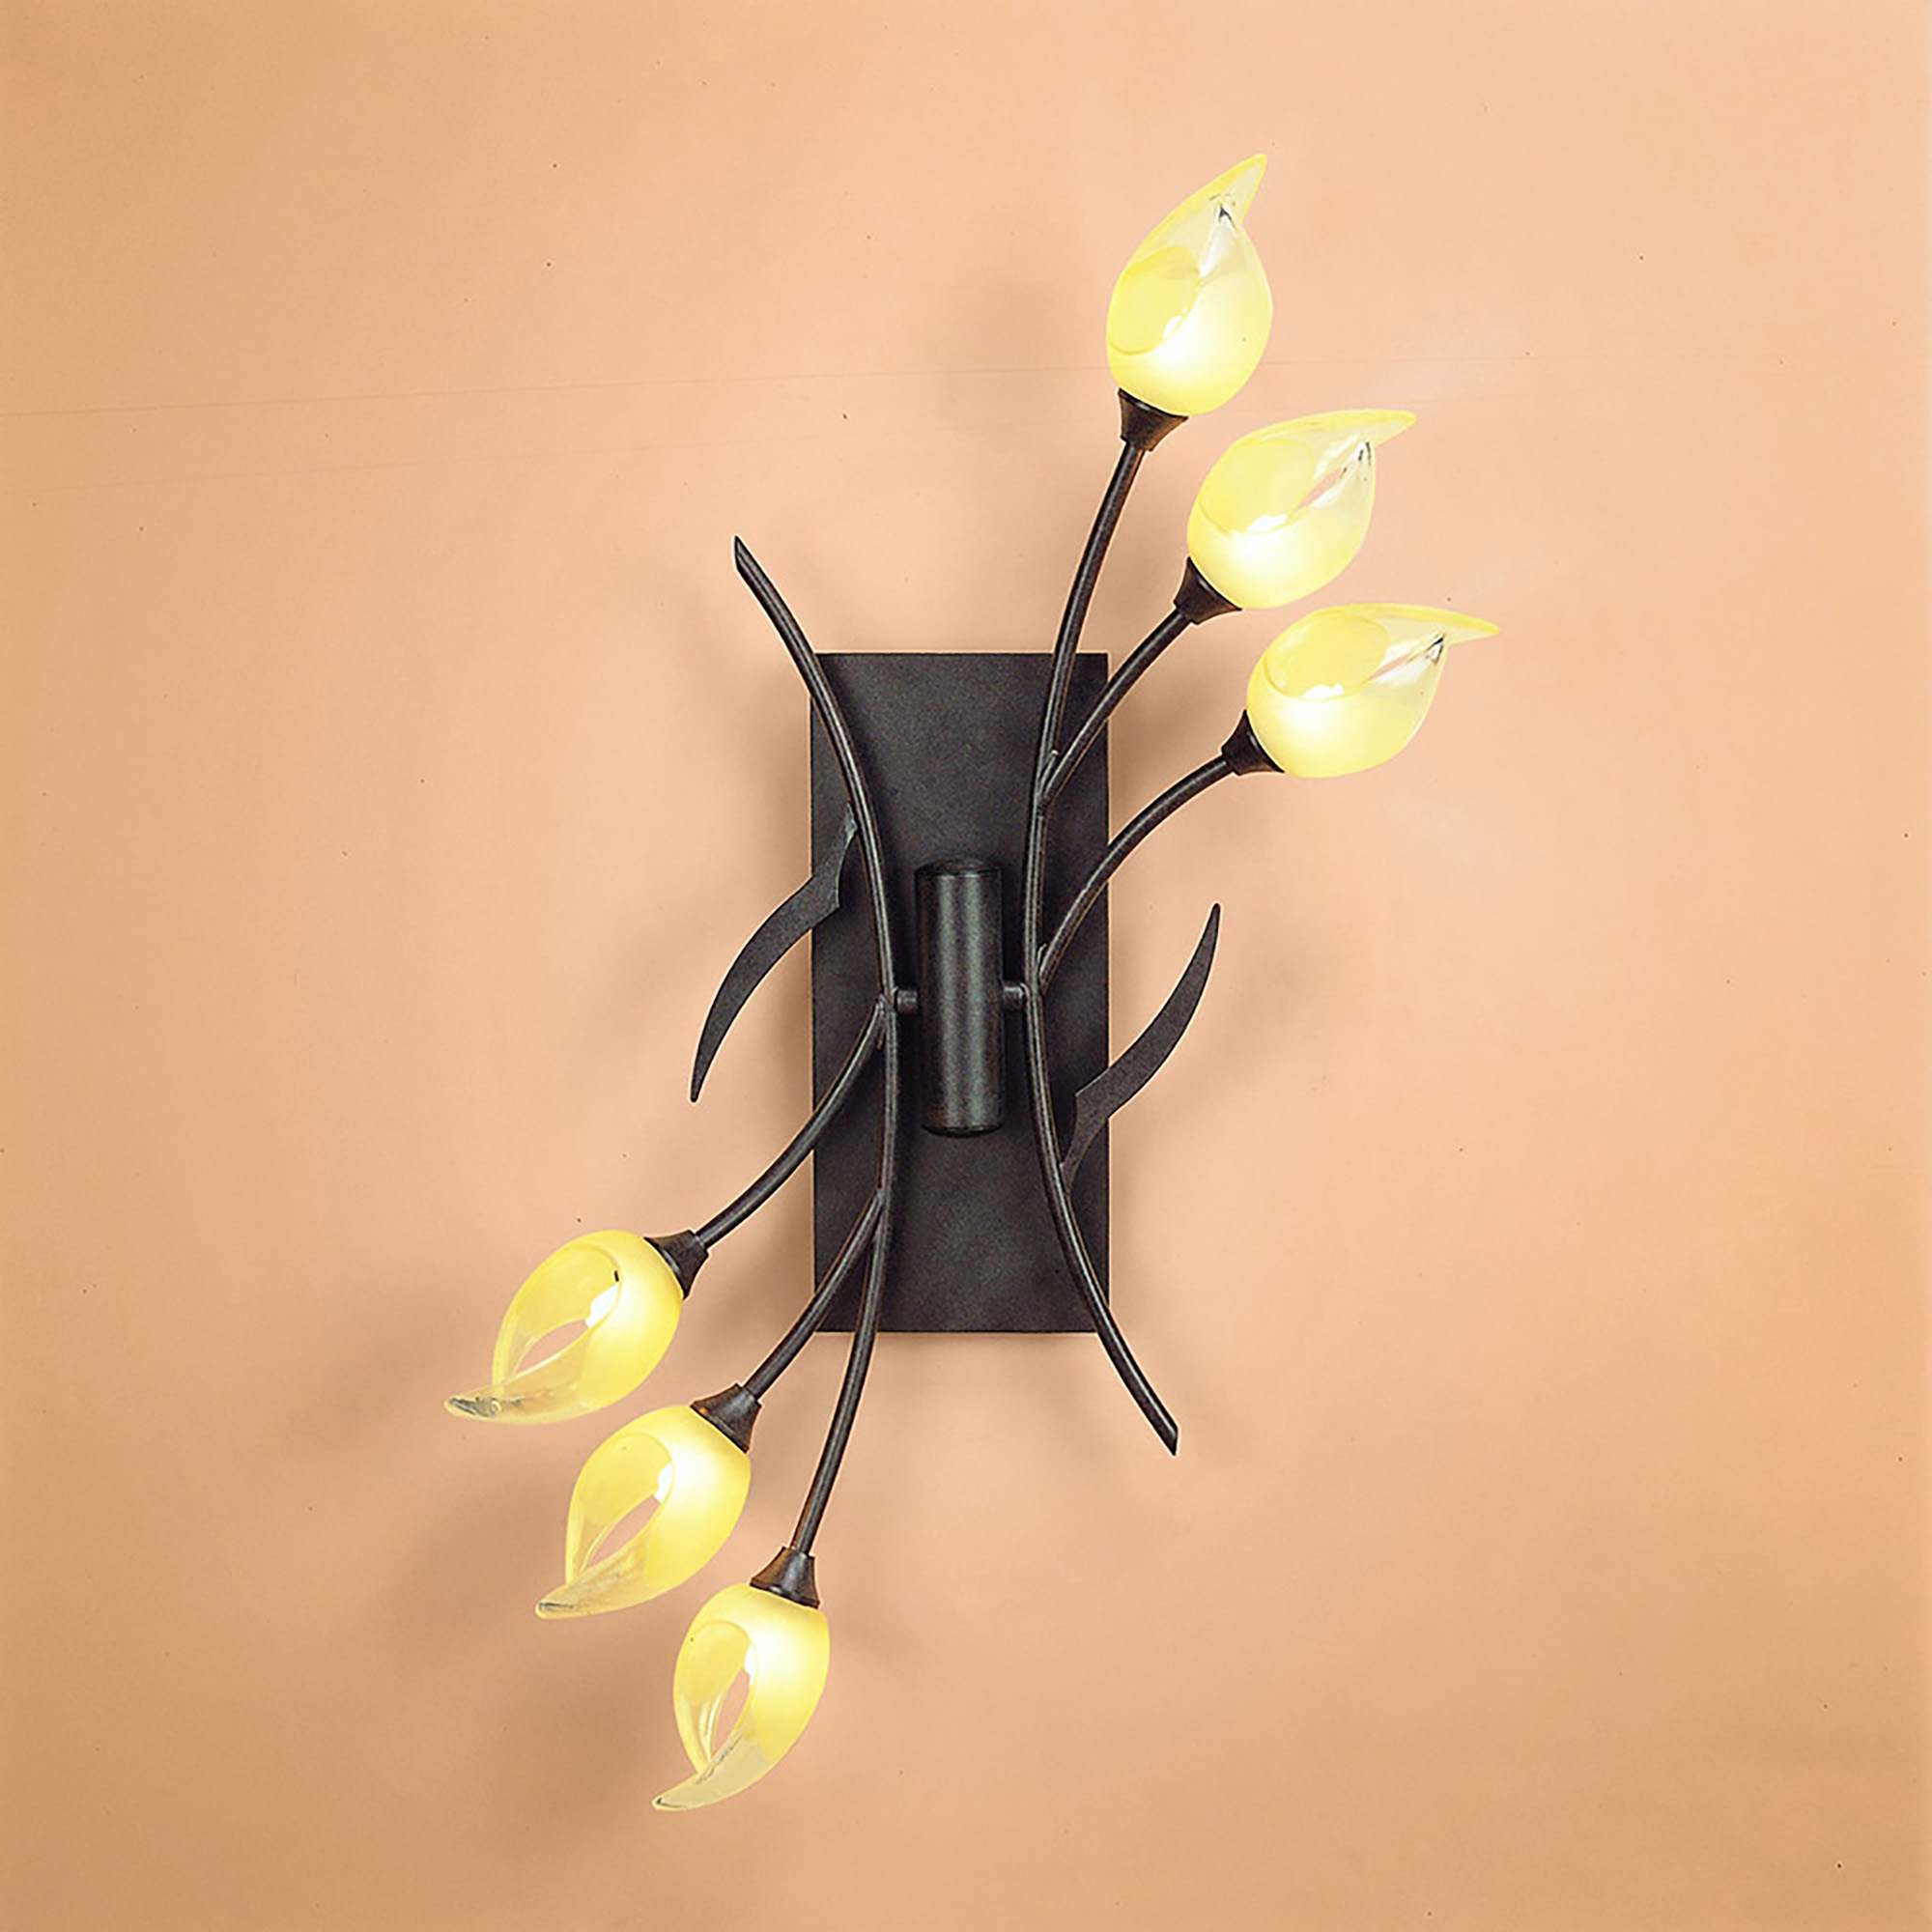 Holland Oxide Wall Lights Mantra Armed Wall Lights